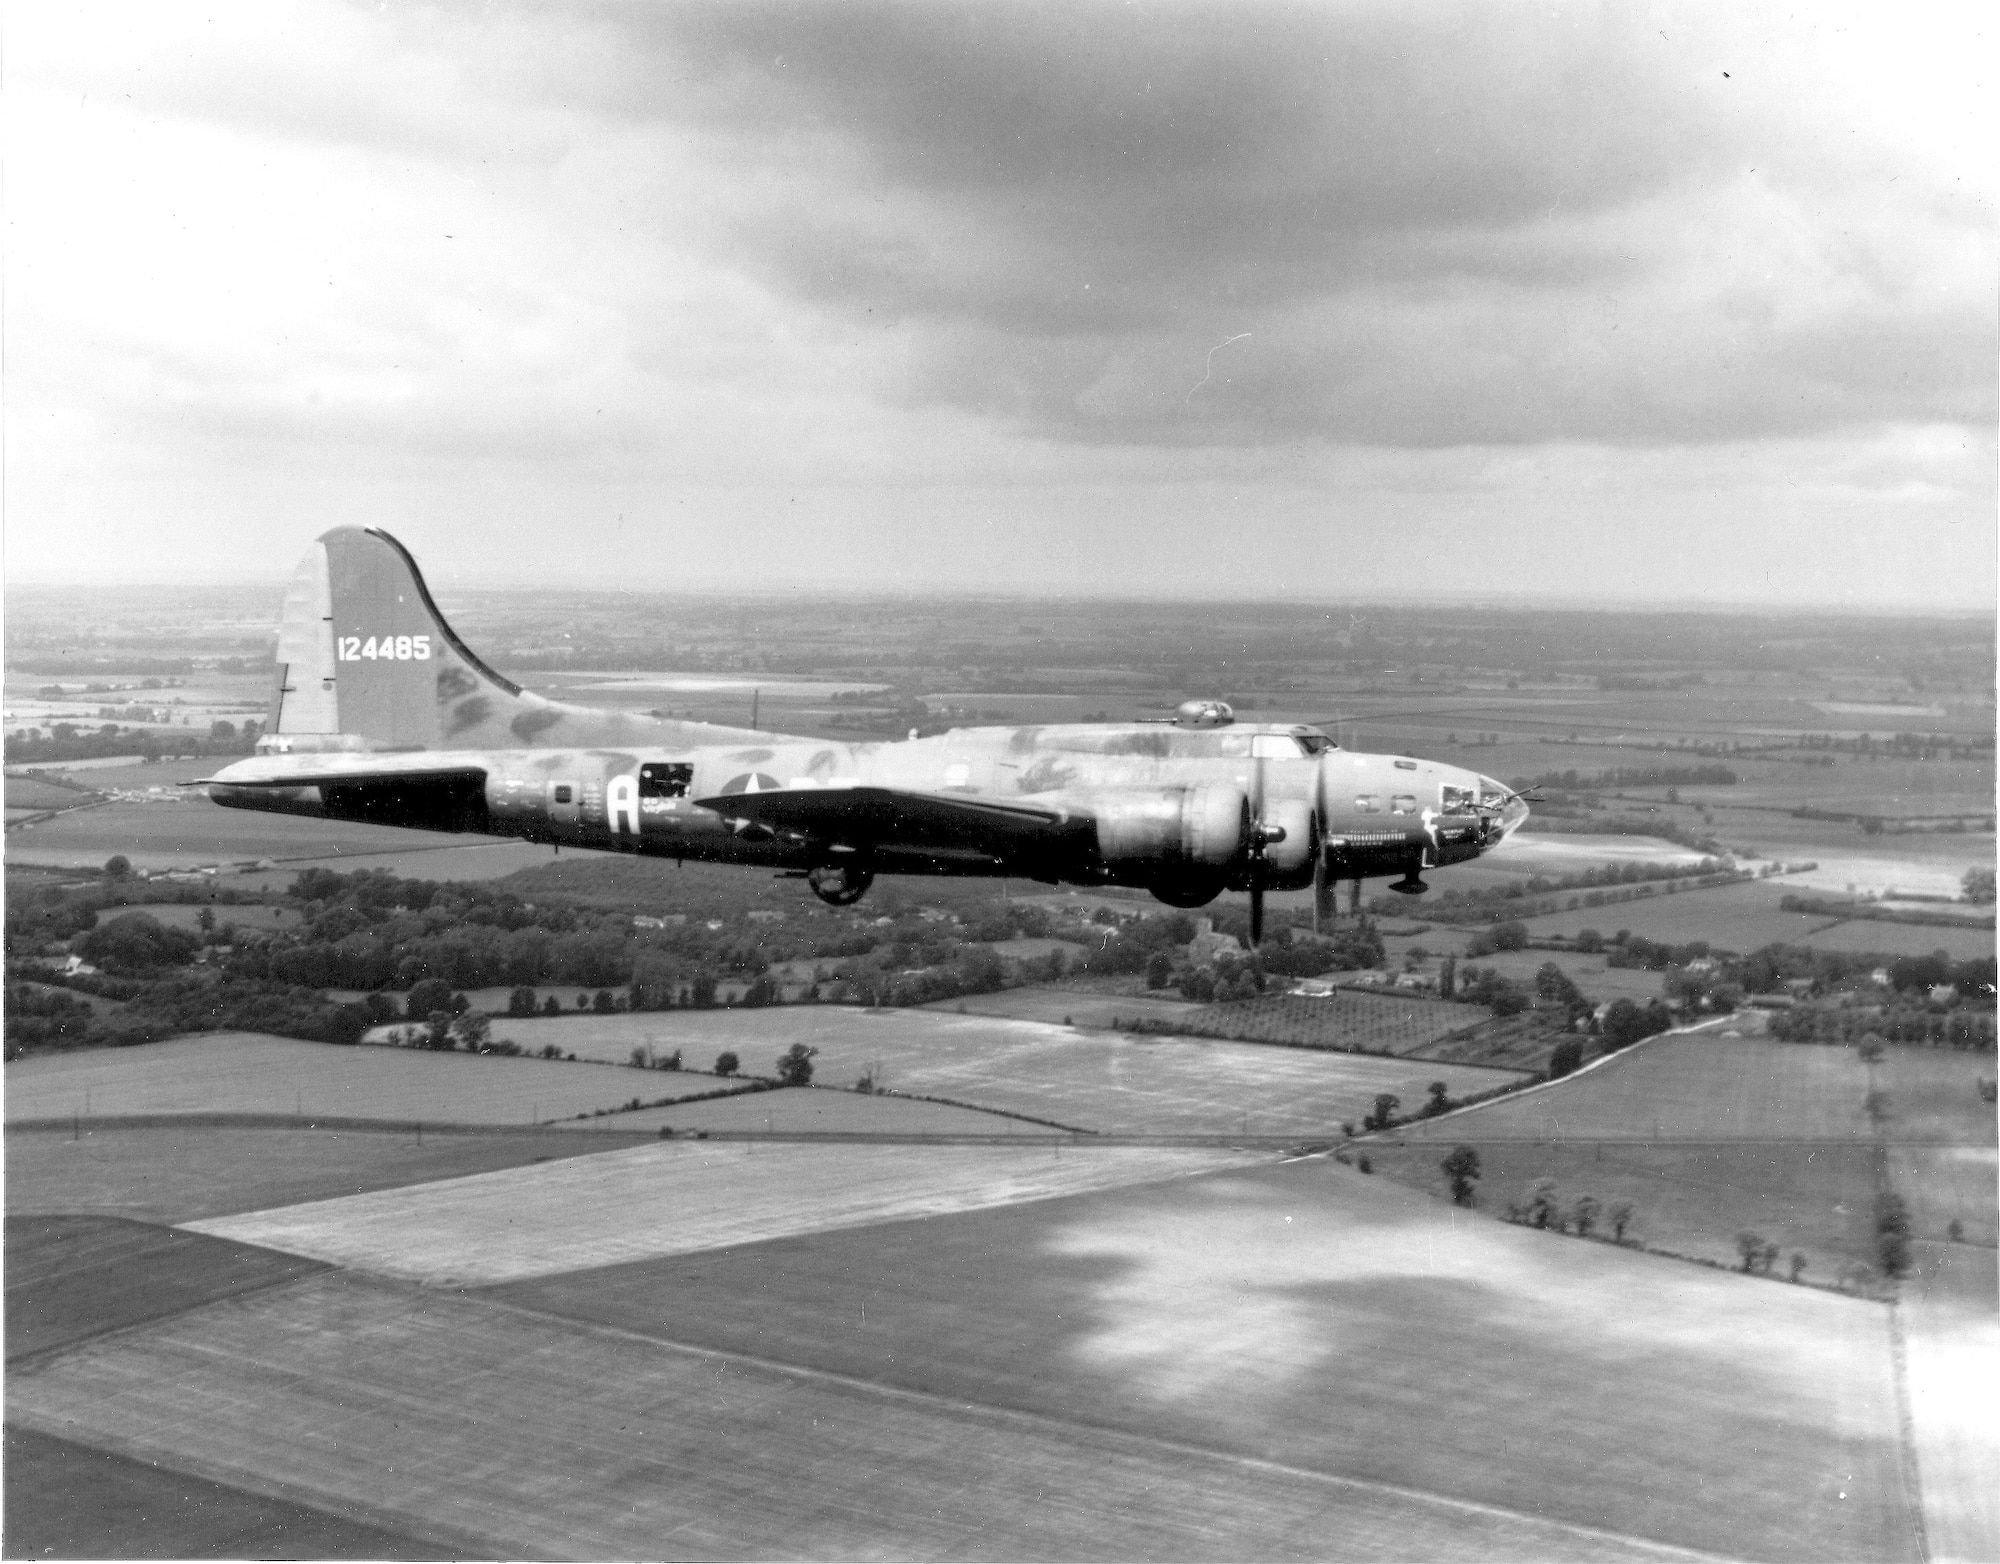 1940's -- The B-17 Flying Fortress "The Memphis Belle" is shown on her way back to the United States June 9, 1943, after successfully completing 25 missions from an airbase in England.